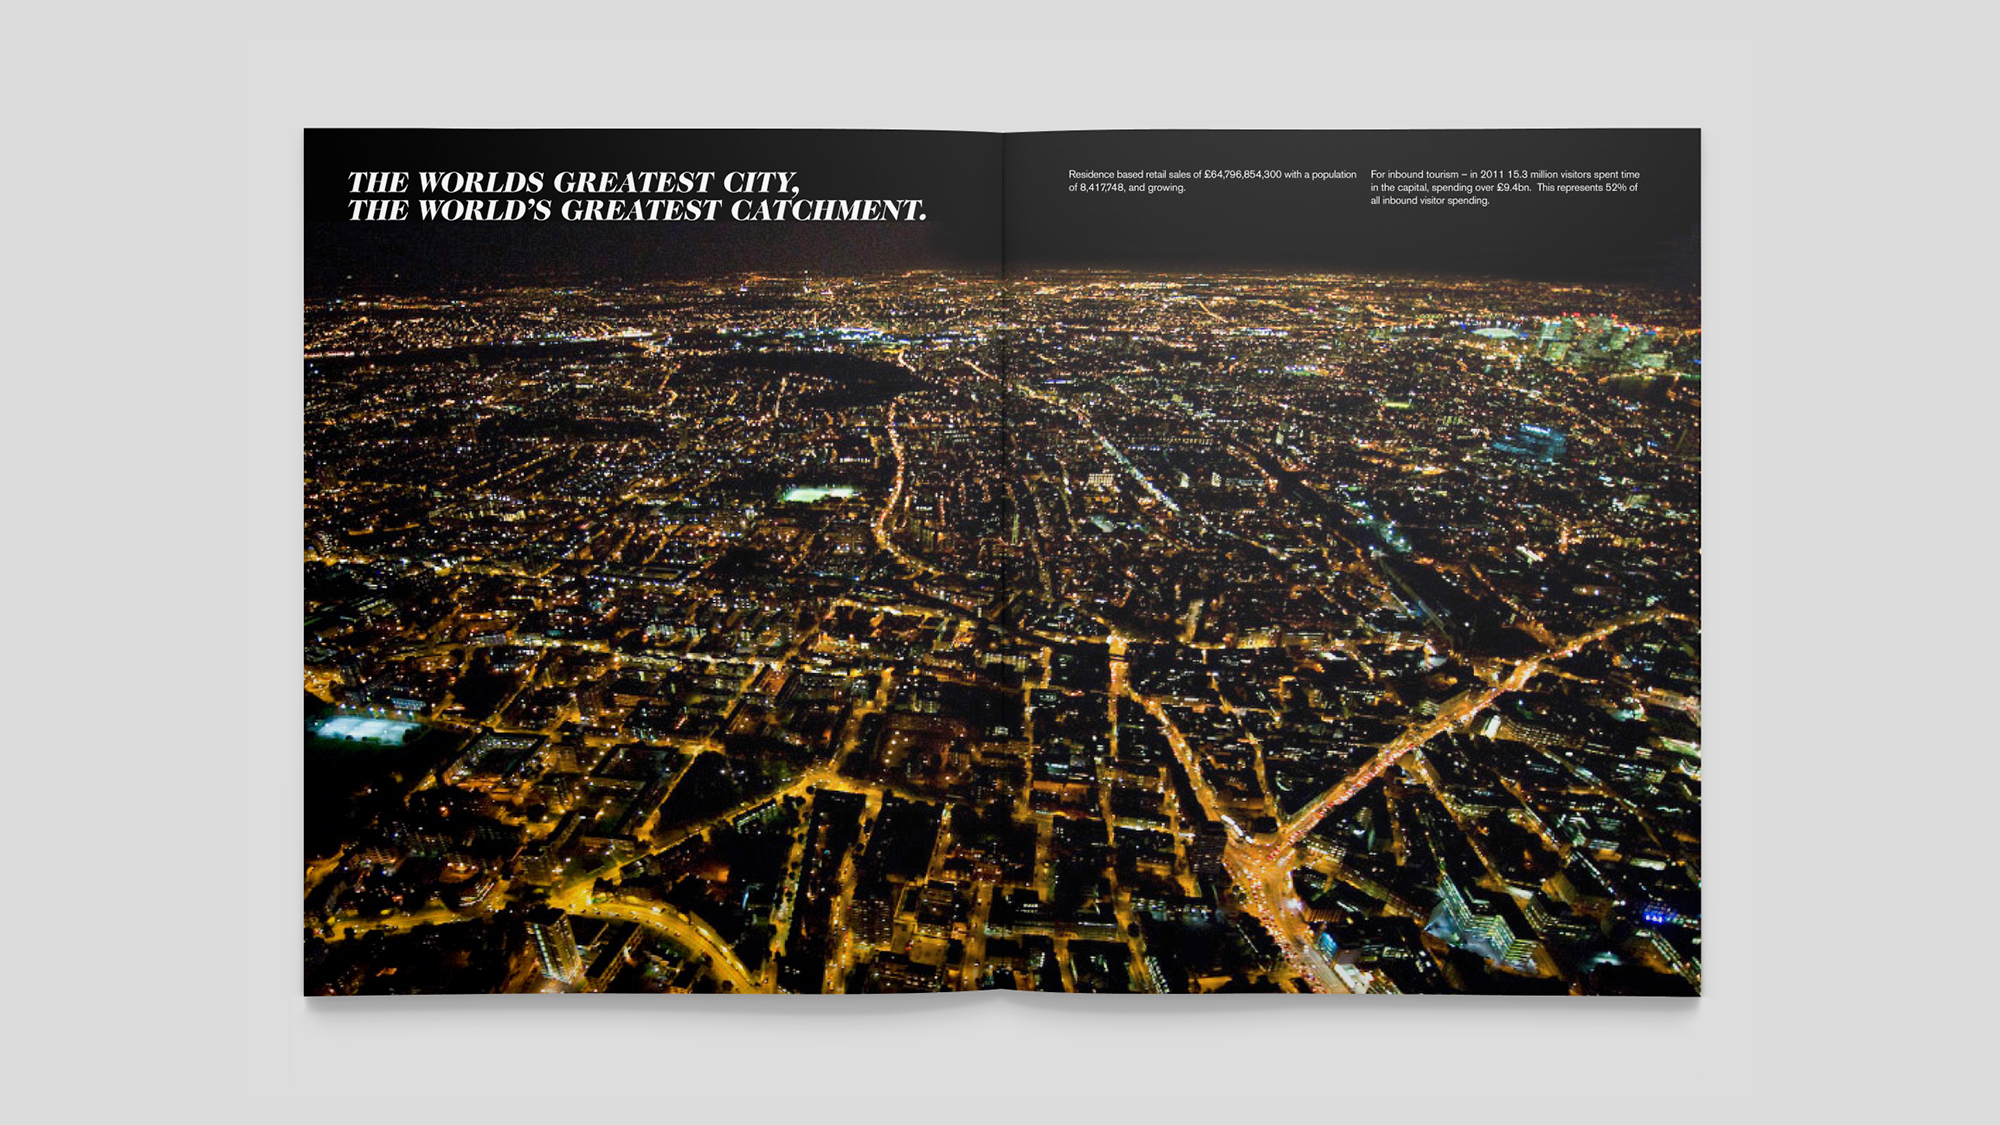 Entity-3-Three-Brand-Design-Agency-Sydney-Transport-for-London-Vision-4-experience-print-book-spread-type-photography